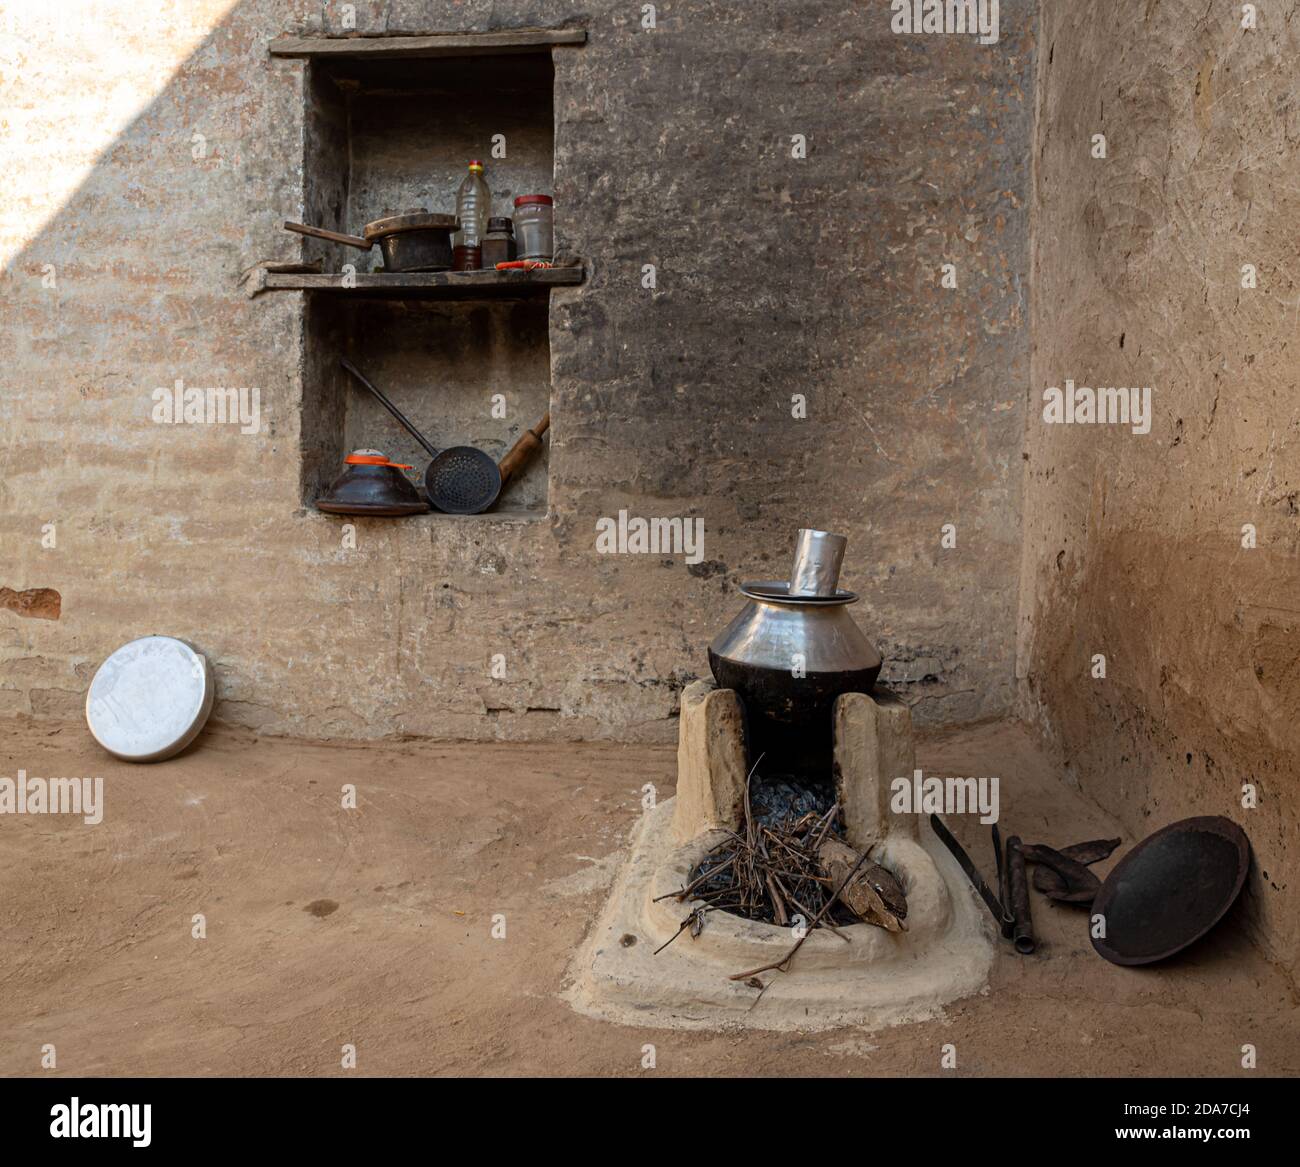 Old Clay Oven in Indian Village Stock Photo - Image of outdoor, fireplace:  266813010